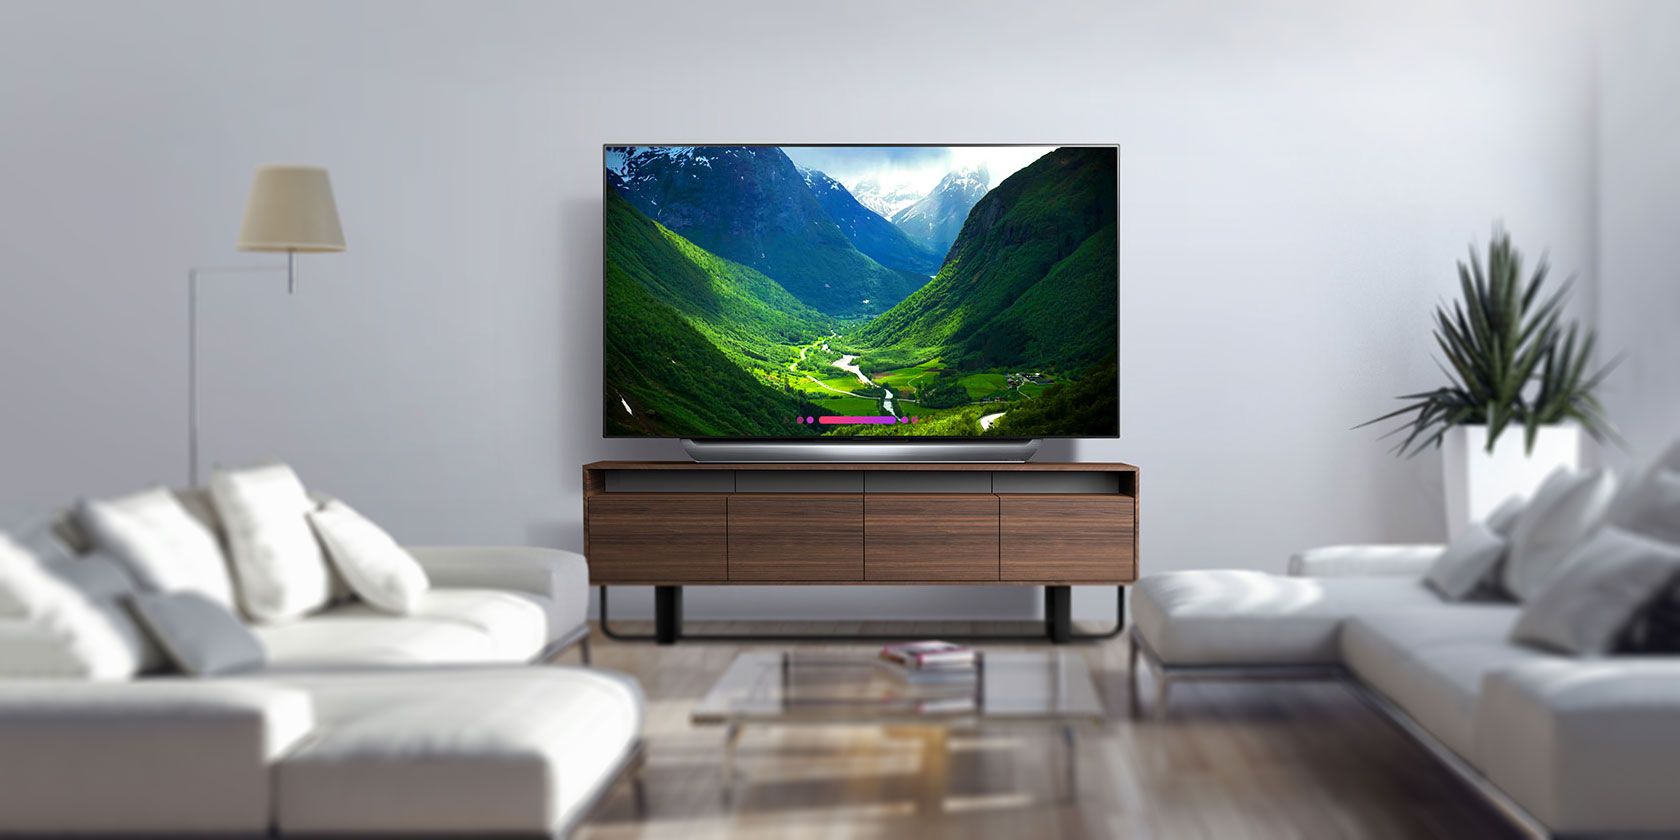 The Best OLED TV LG, Sony, and Panasonic Compared